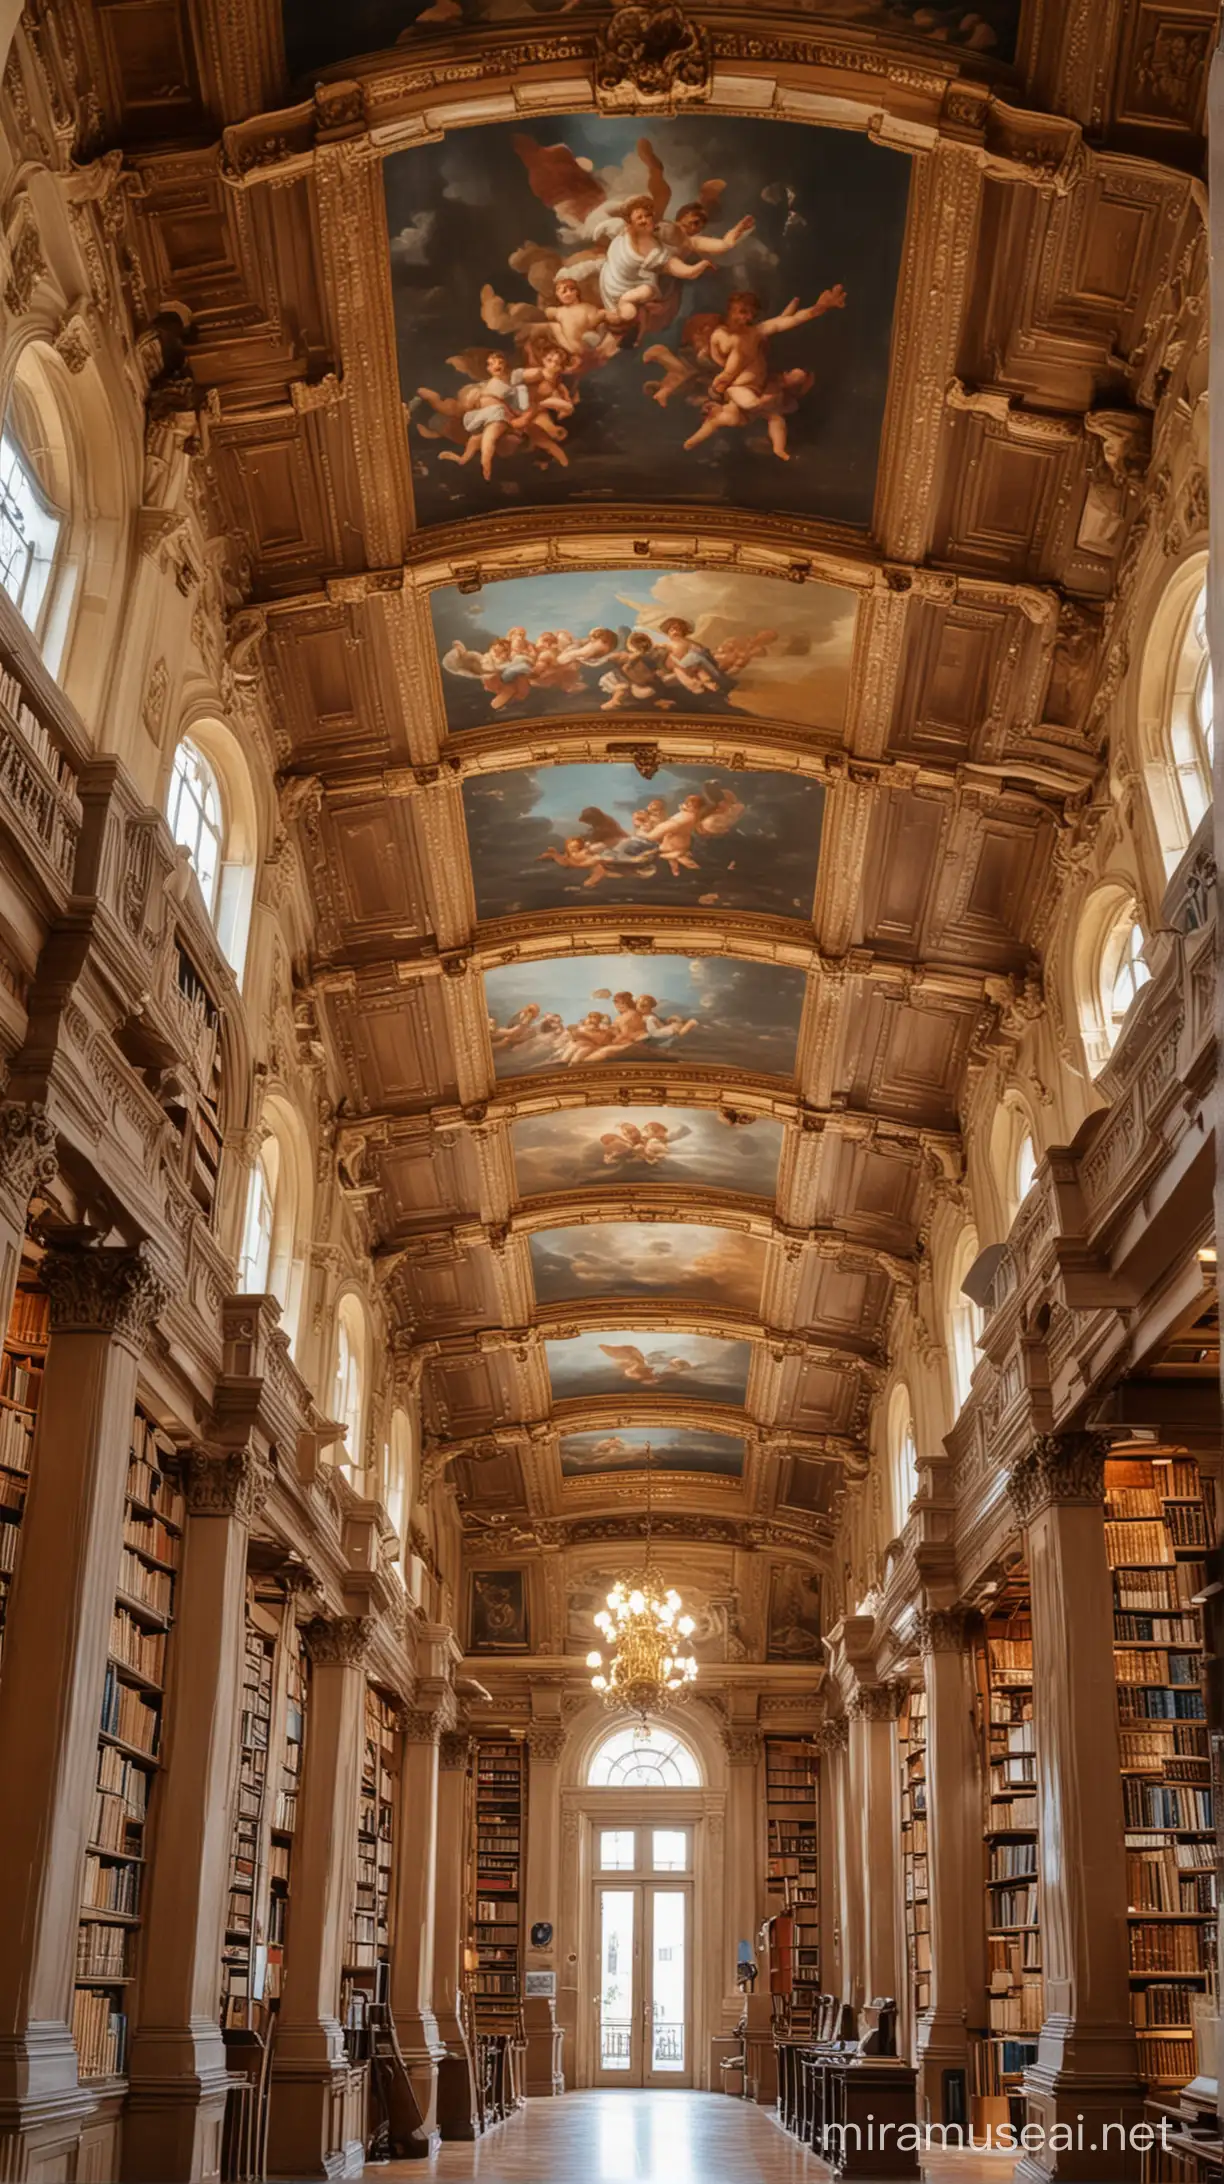 Enchanting Library with Classic Architecture and Angelic Paintings